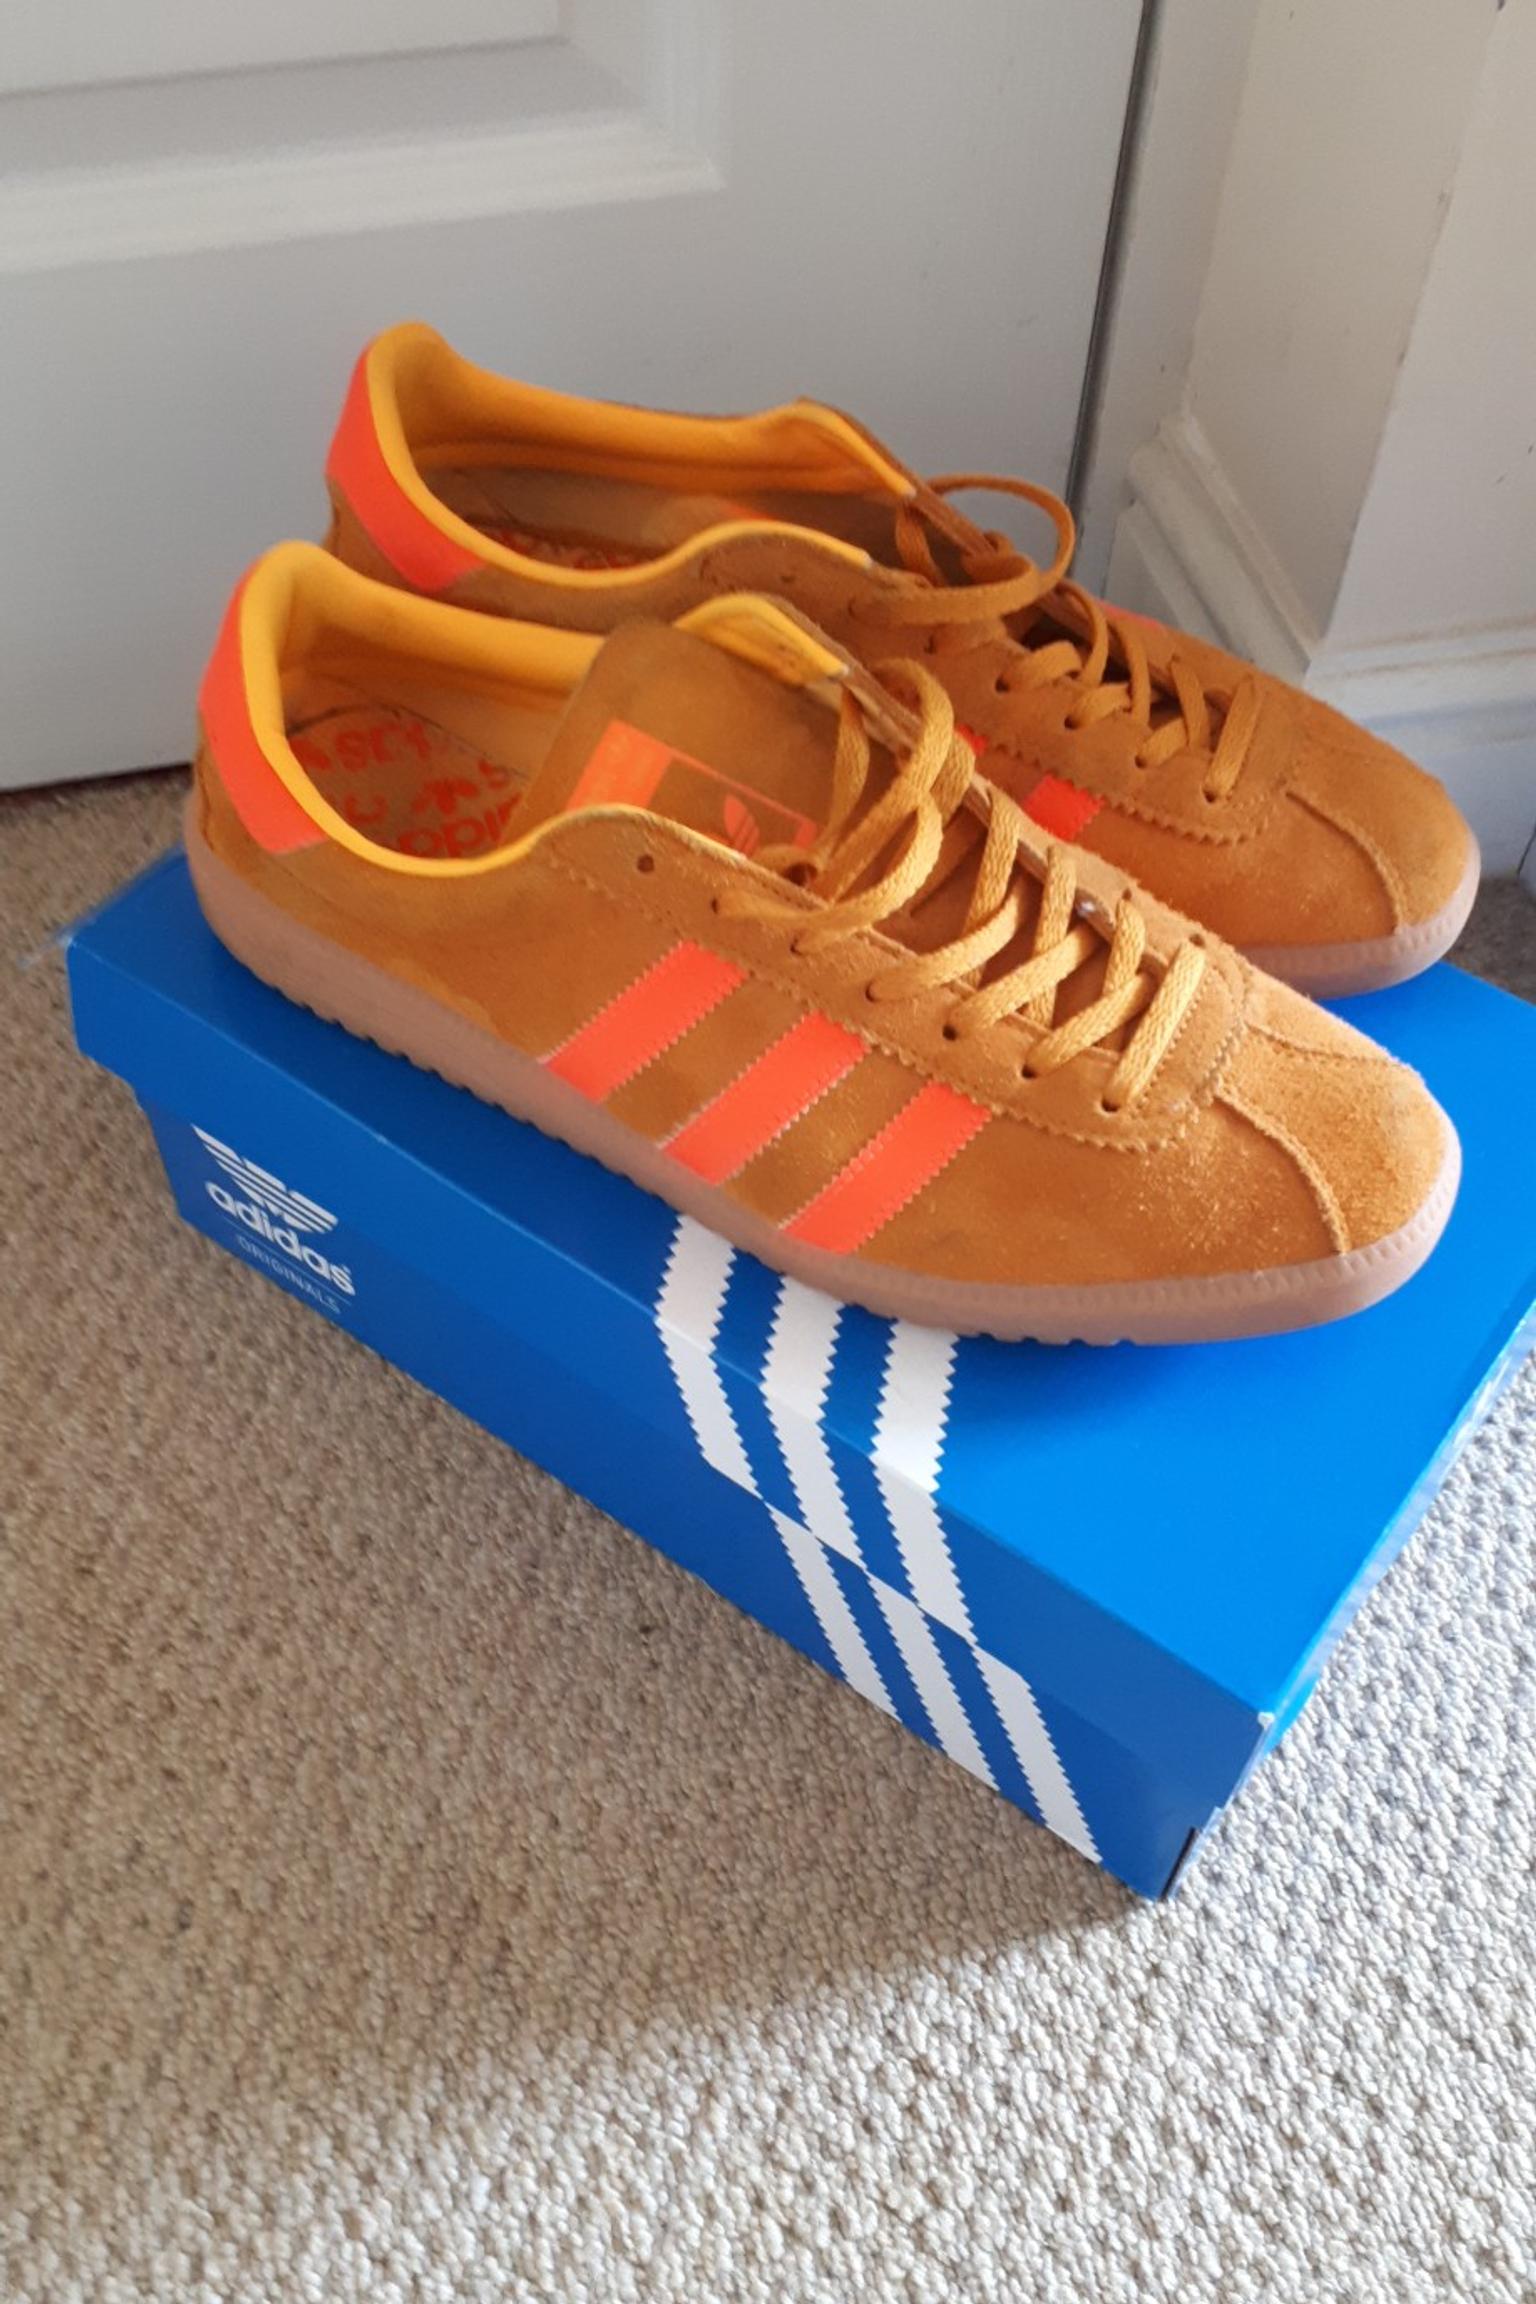 Adidas Bermuda orange gold size 9 in DY8 Dudley for £20.00 for sale | Shpock